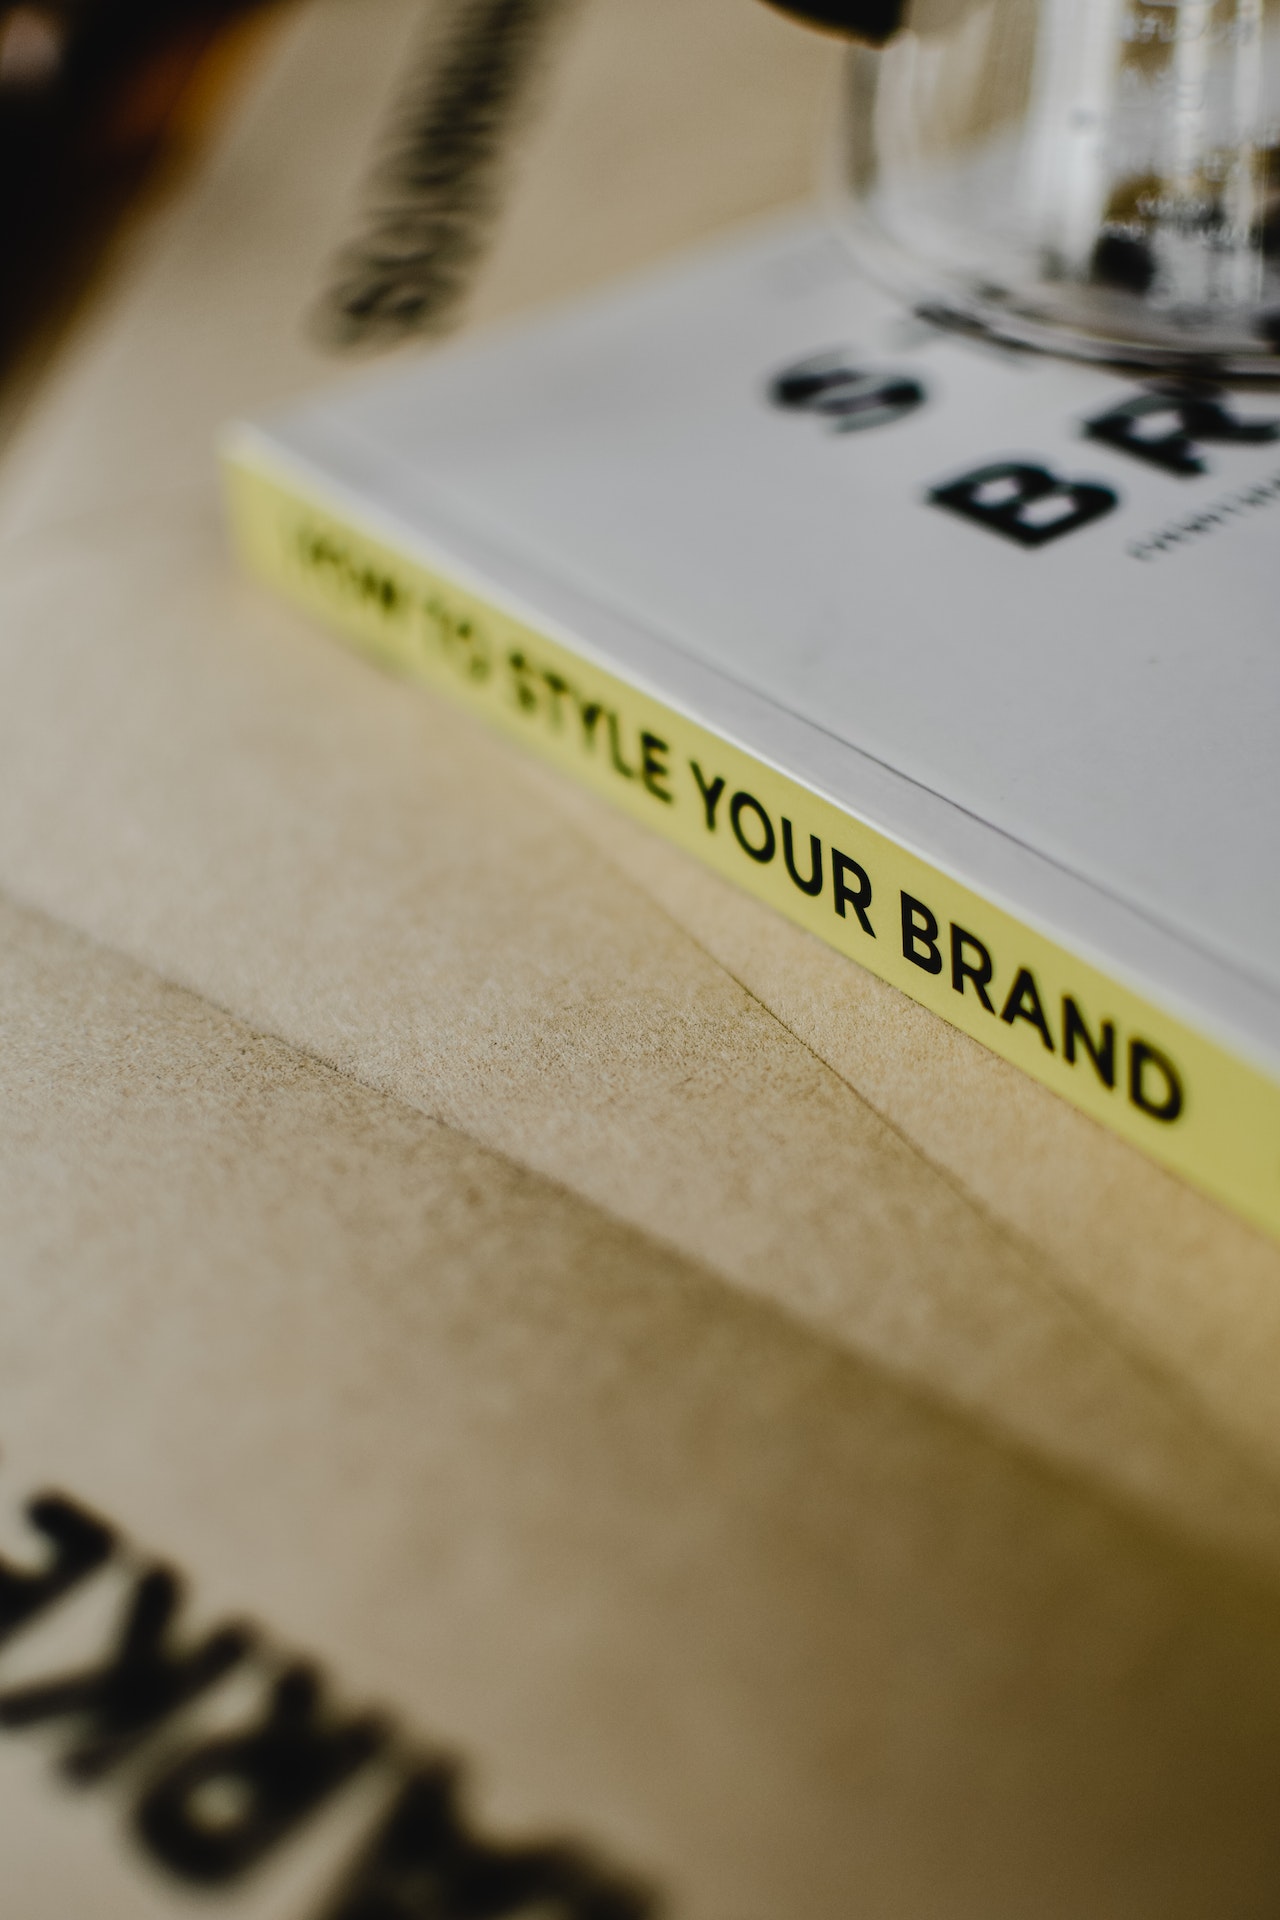 Branding Tips to Boost Your Company Image